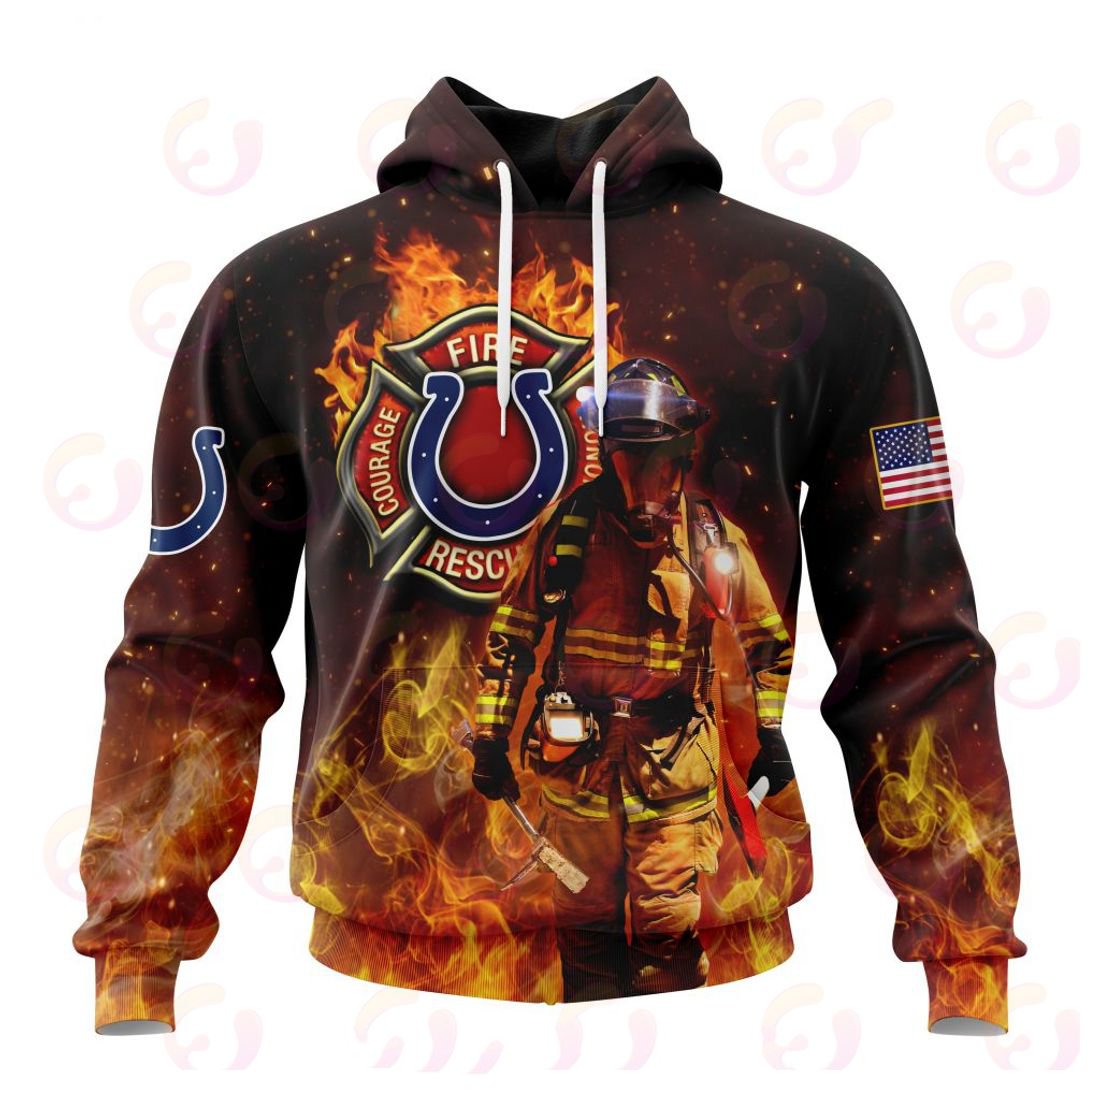 INDIANAPOLIS COLTS HONOR FIREFIGHTERS – FIRST RESPONDERS 3D HOODIE